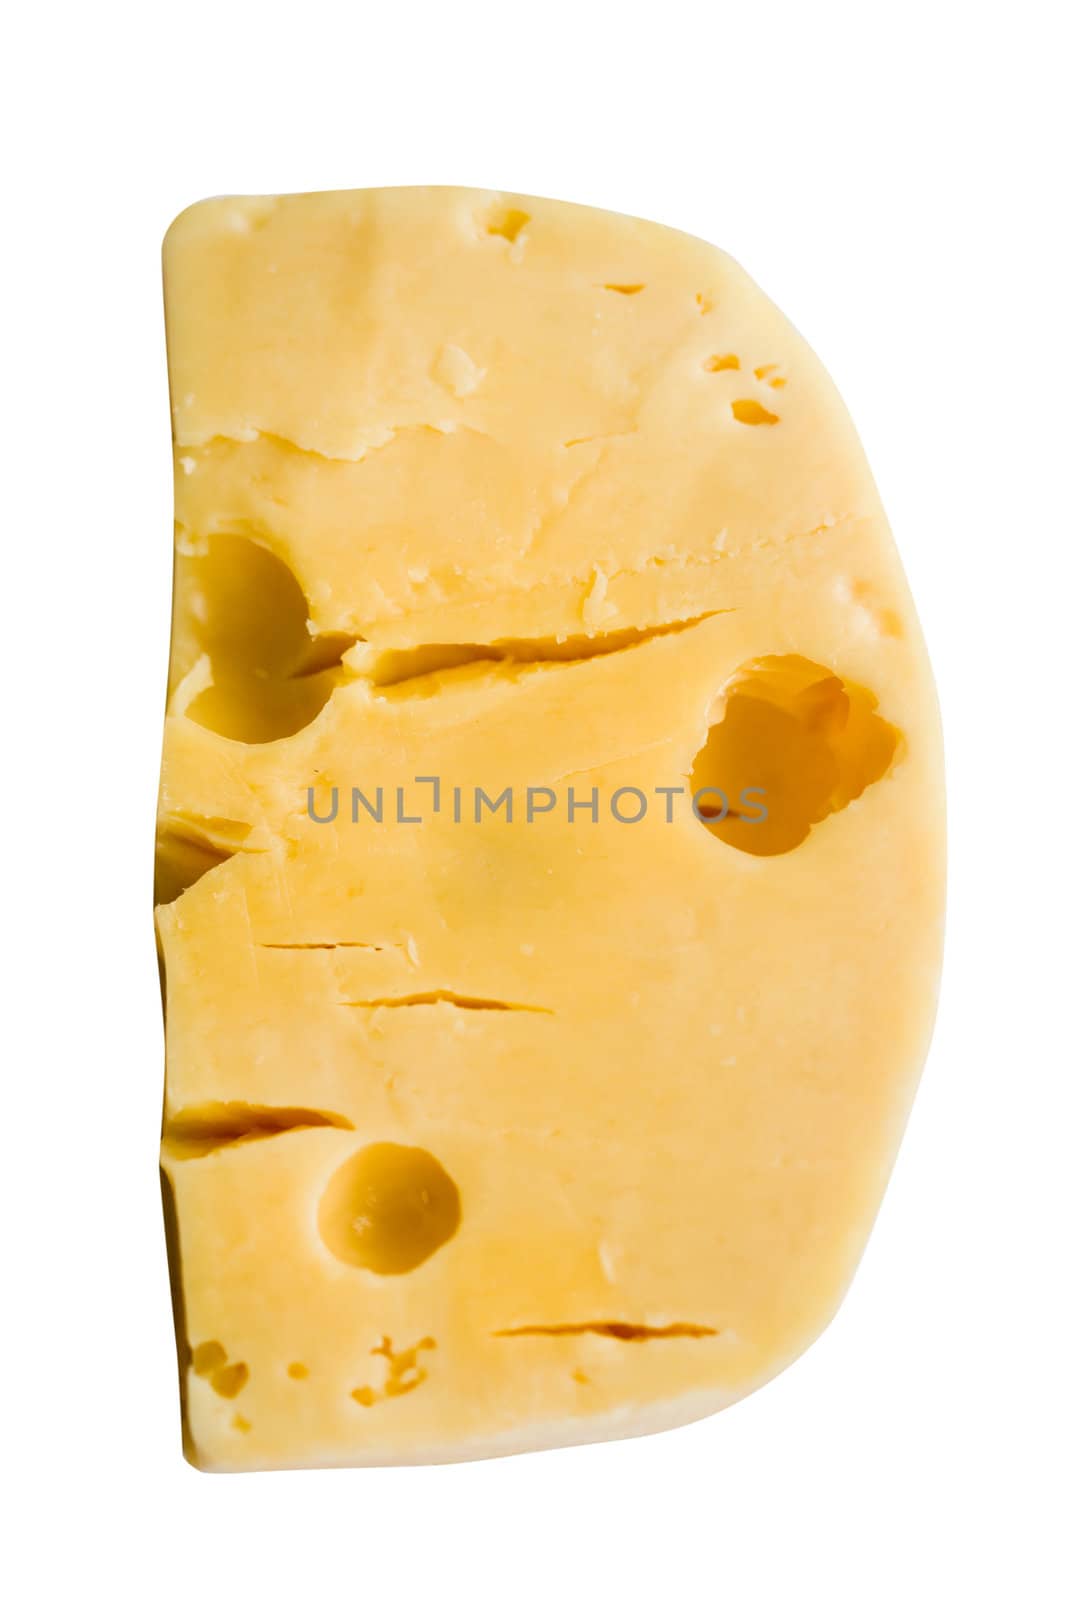 Stock photo: an image of a background of yellow cheese